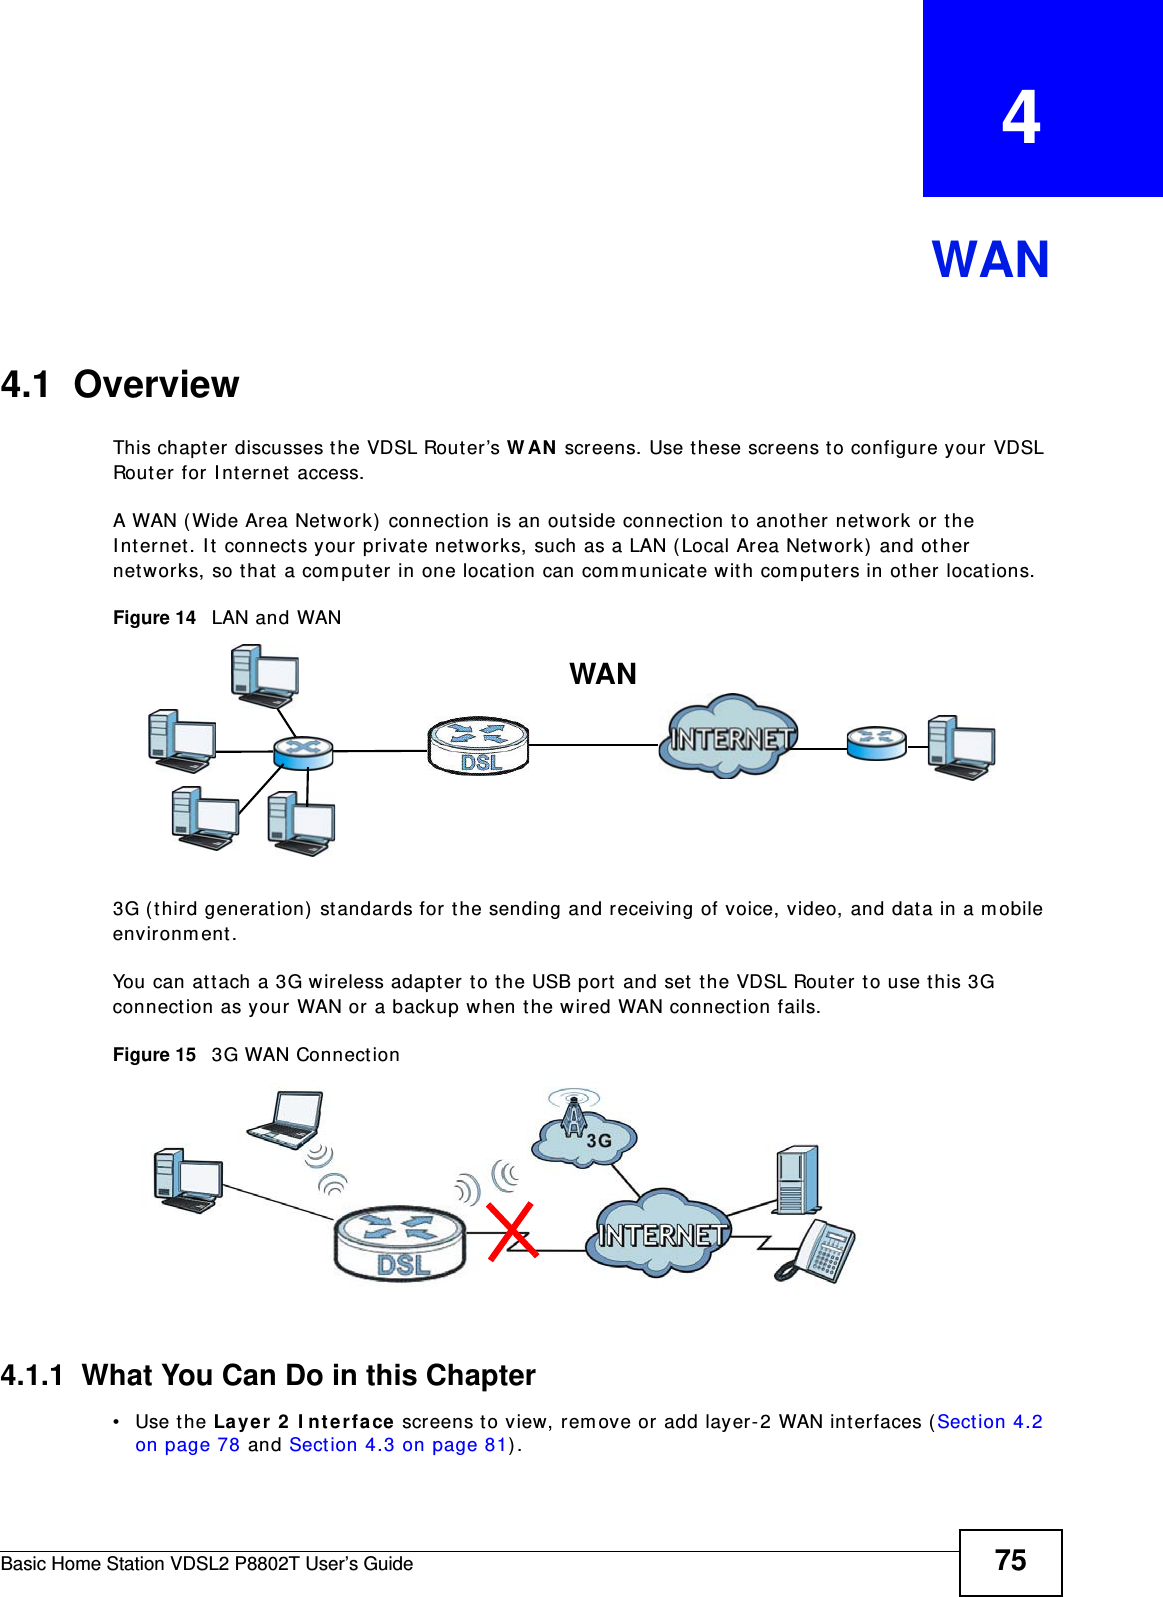 Basic Home Station VDSL2 P8802T User’s Guide 75CHAPTER   4WAN4.1  OverviewThis chapt er discusses t he VDSL Rout er’s W AN  screens. Use these screens t o configure your VDSL Router for I nternet  access.A WAN ( Wide Area Network) connection is an outside connect ion to another networ k or  the I nt ernet . I t connect s your pr ivate networks, such as a LAN ( Local Area Net work) and ot her  net works, so that  a com puter in one locat ion can com m unicate wit h com puters in ot her locations.Figure 14   LAN and WAN3G (third generat ion)  st andar ds for the sending and receiving of voice, video, and dat a in a m obile environm ent . You can at t ach a 3G wireless adapter to the USB port and set  t he VDSL Router to use t his 3G connect ion as your WAN or  a backup when t he wired WAN connect ion fails.Figure 15   3G WAN Connect ion 4.1.1  What You Can Do in this Chapter• Use the La ye r 2  I nterface screens t o view, rem ove or  add layer-2 WAN interfaces ( Sect ion 4.2 on page 78 and Sect ion 4.3 on page 81) .WAN